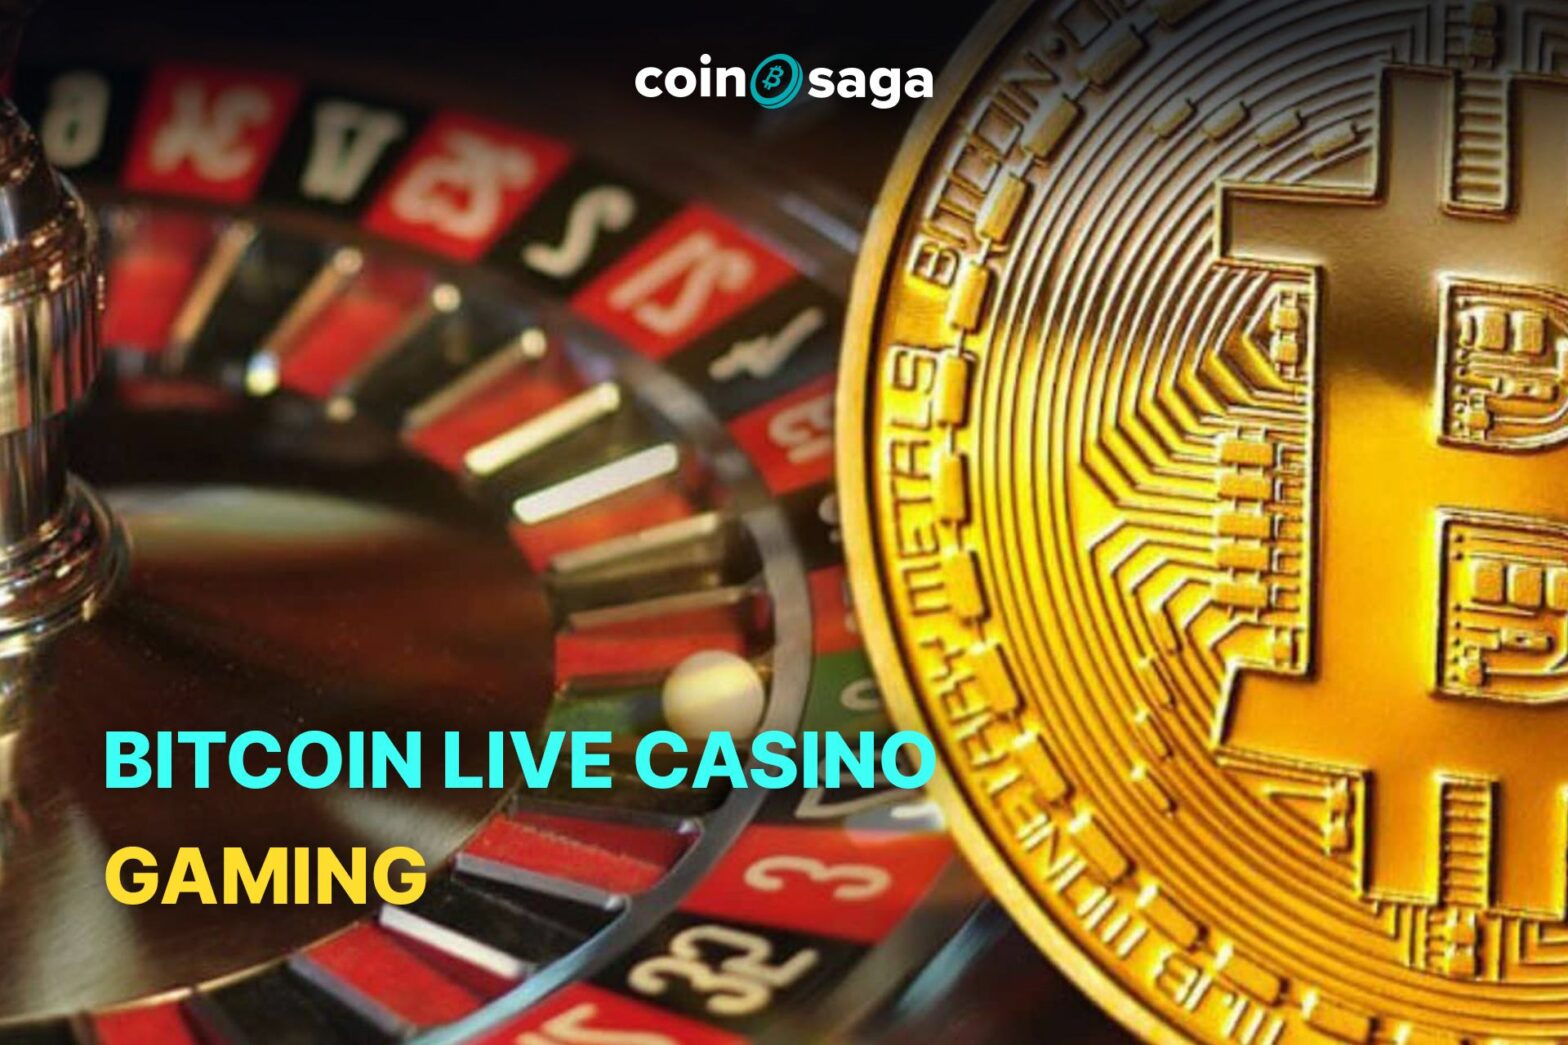 Is play casino with bitcoin Making Me Rich?